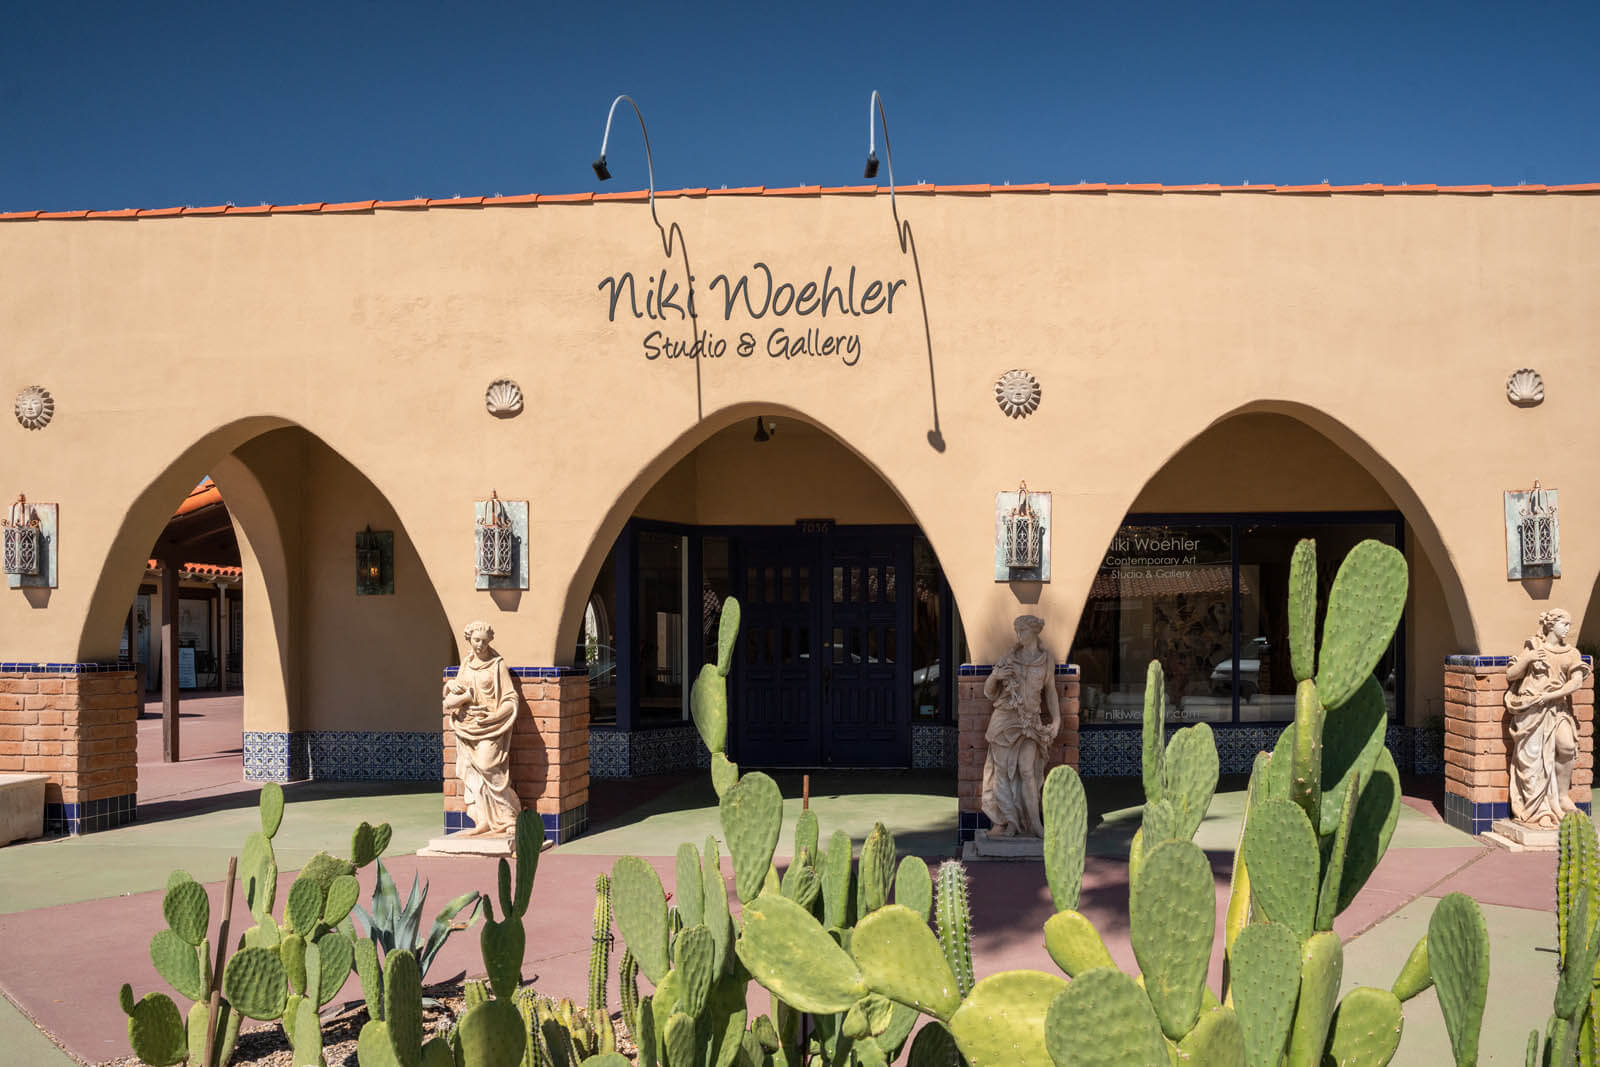 Nick Woehler Studio and Gallery one of the many art galleries in Old Town Scottsdale Arizona